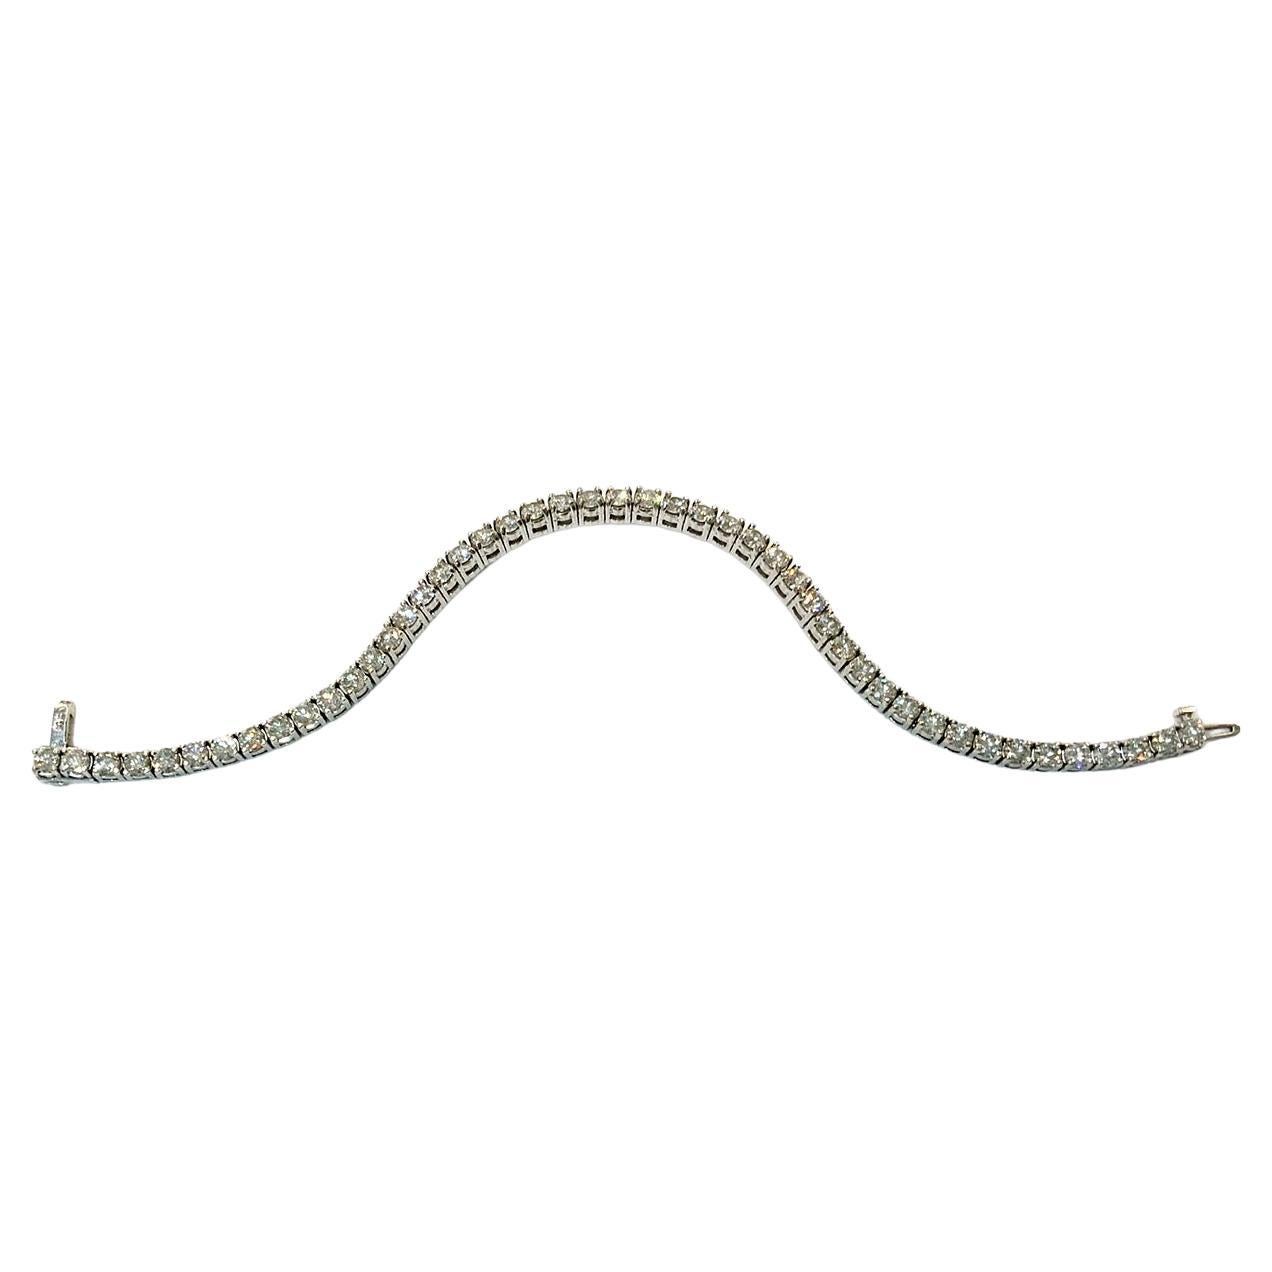 This timeless tennis Bracelet feature 47 sparkling diamonds in VS-2 Quality in G-H Color.
The bracelet keeps securely on the wrist when worn, making it suitable for frequent wear. 


Total Diamond Weight: 8.20 ct  No. of Diamonds: 47 Diamond Color: